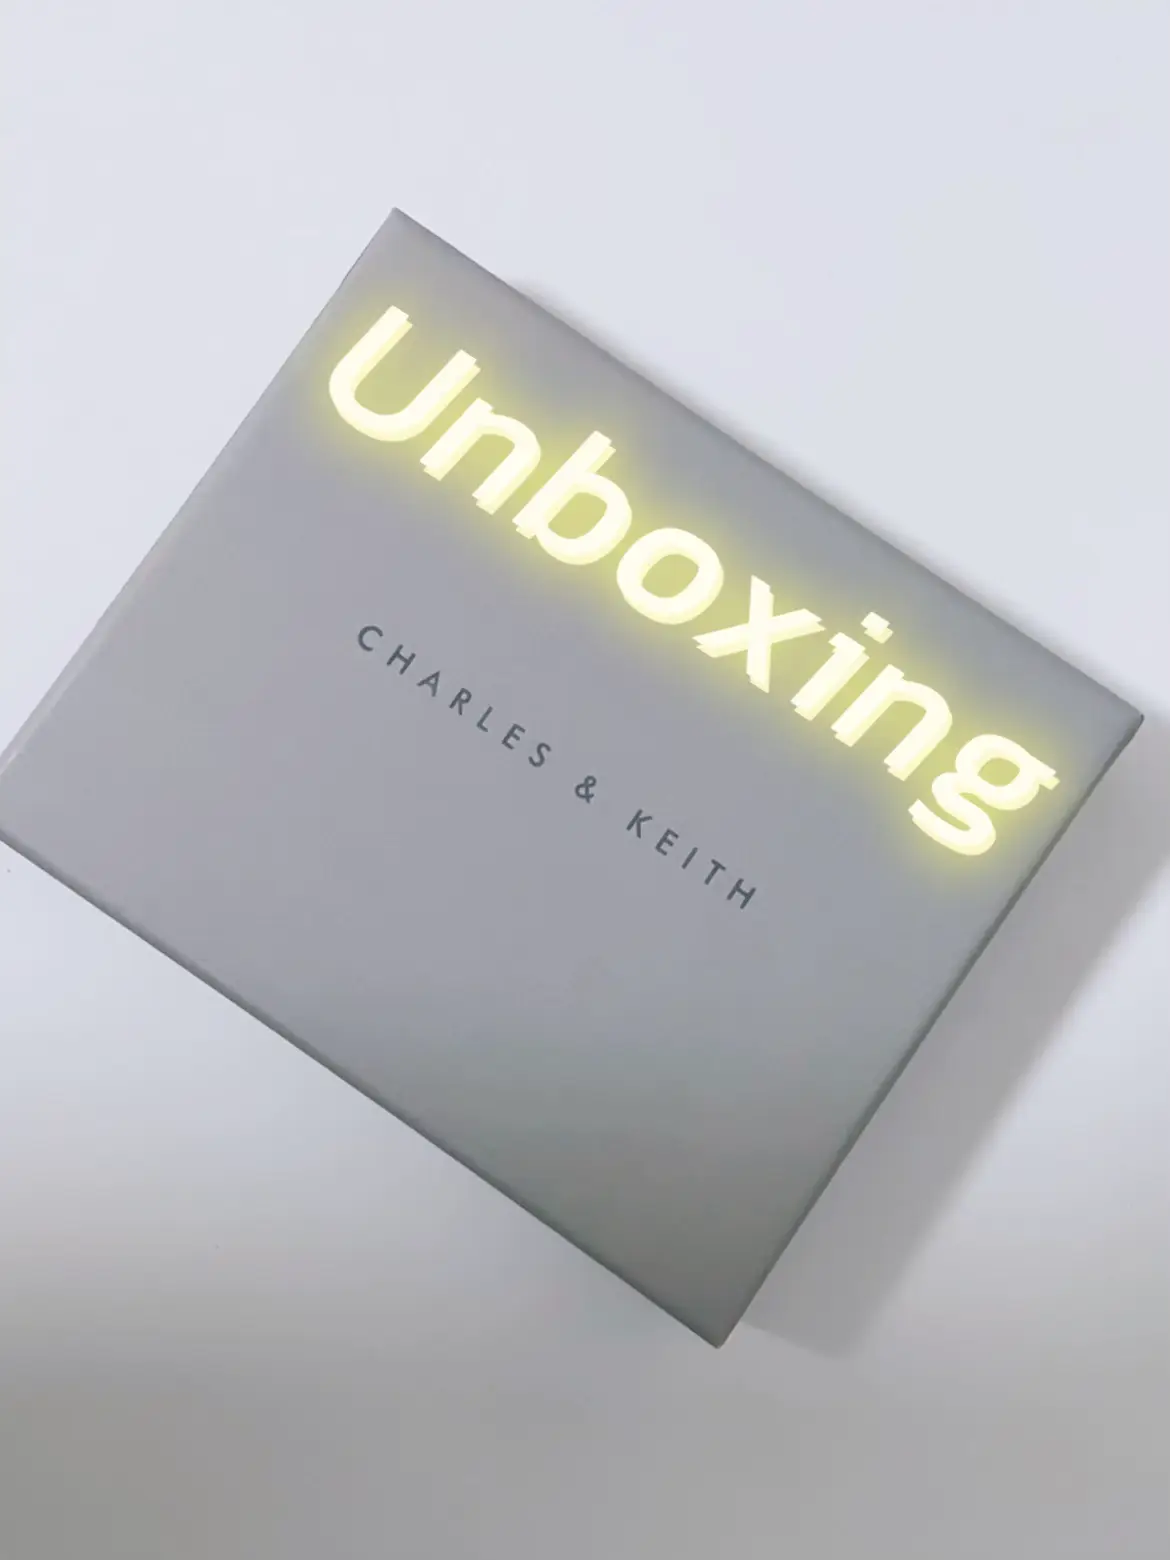 Louis Vuitton Business Card Holder Unboxing and Review